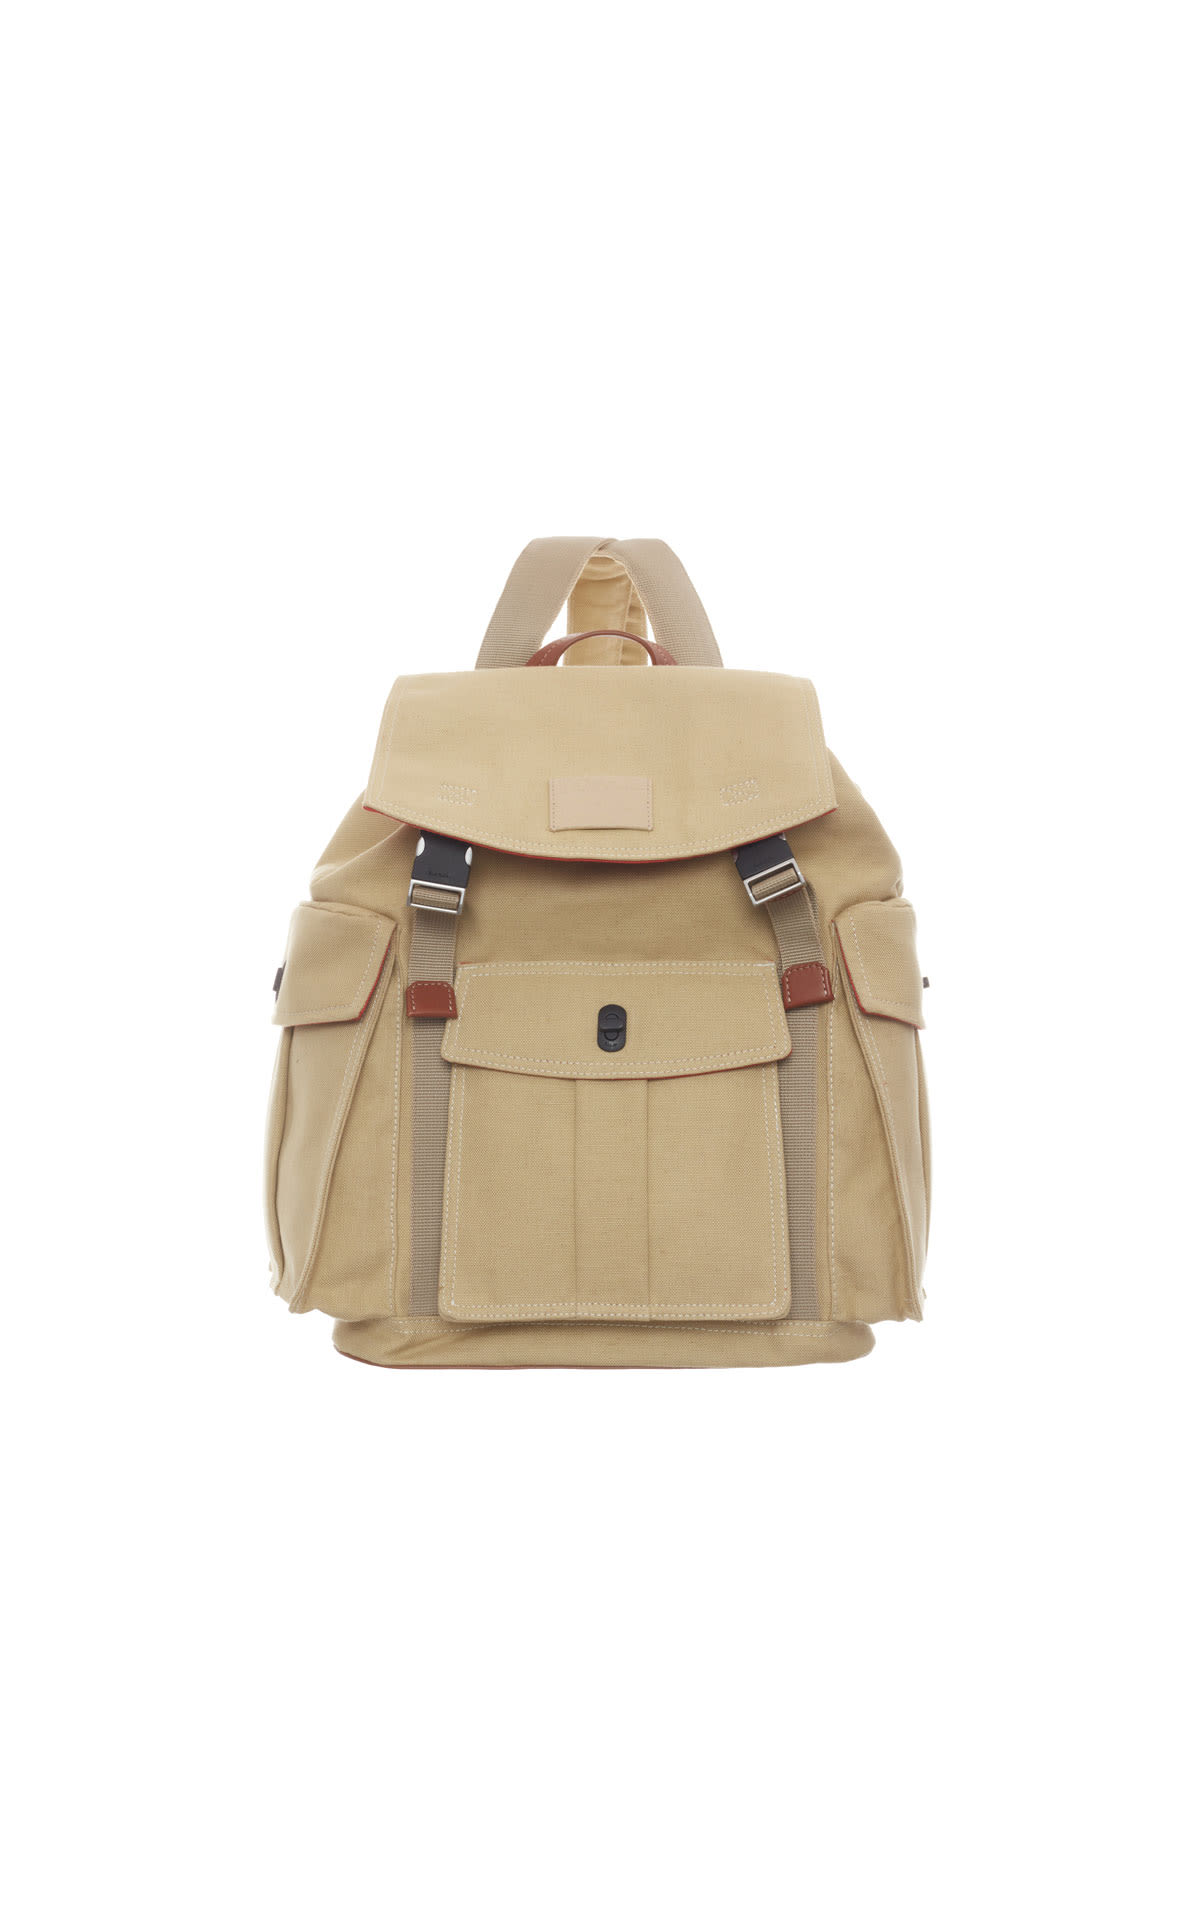 Paul Smith Canvas backpack from Bicester Village